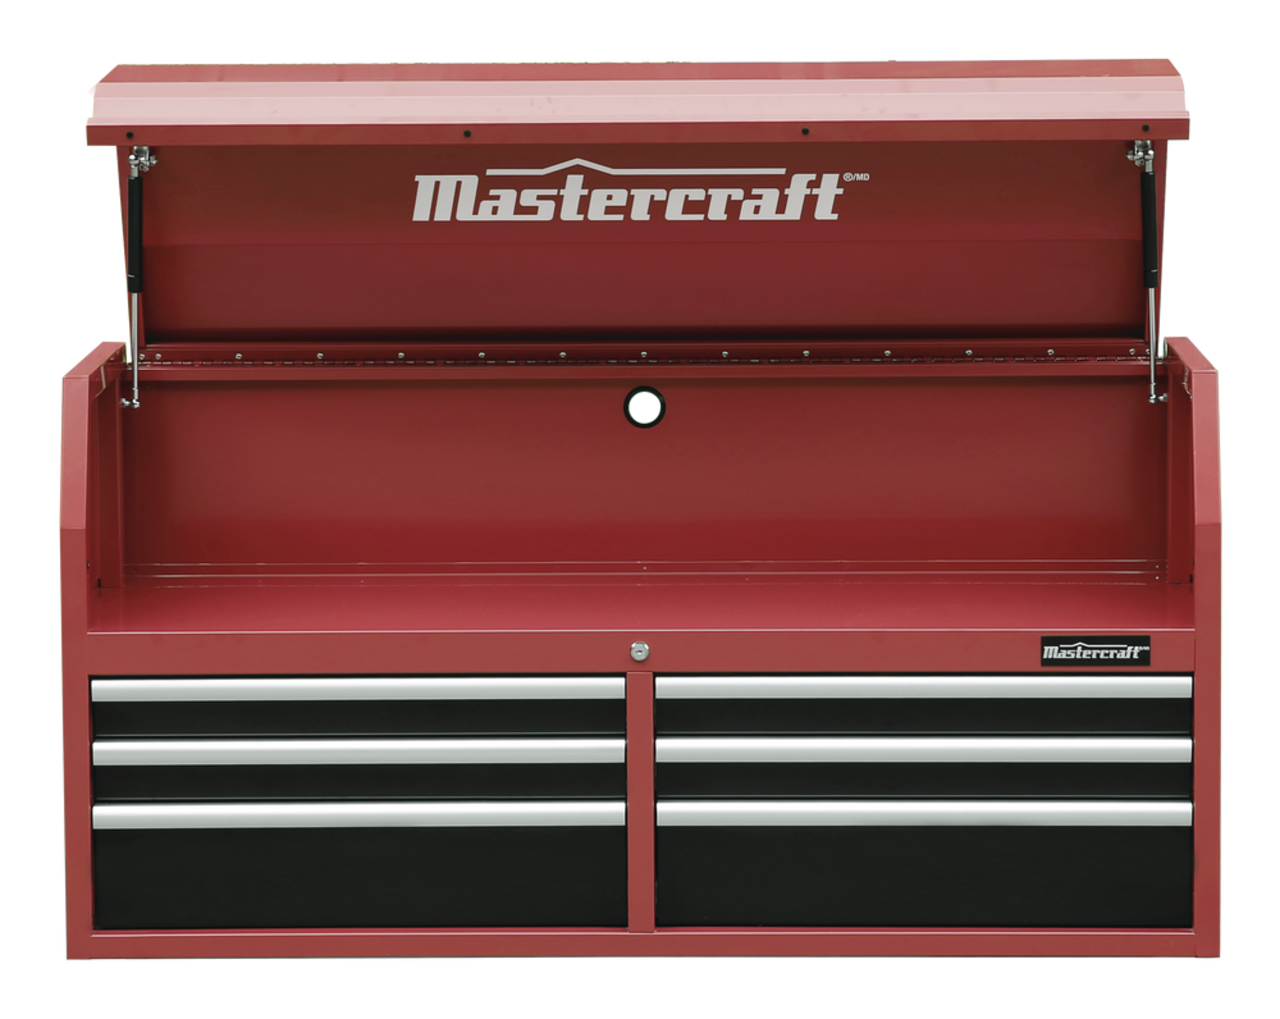 Mastercraft Tool Chest w/ 6 Drawers, Red, 53-in